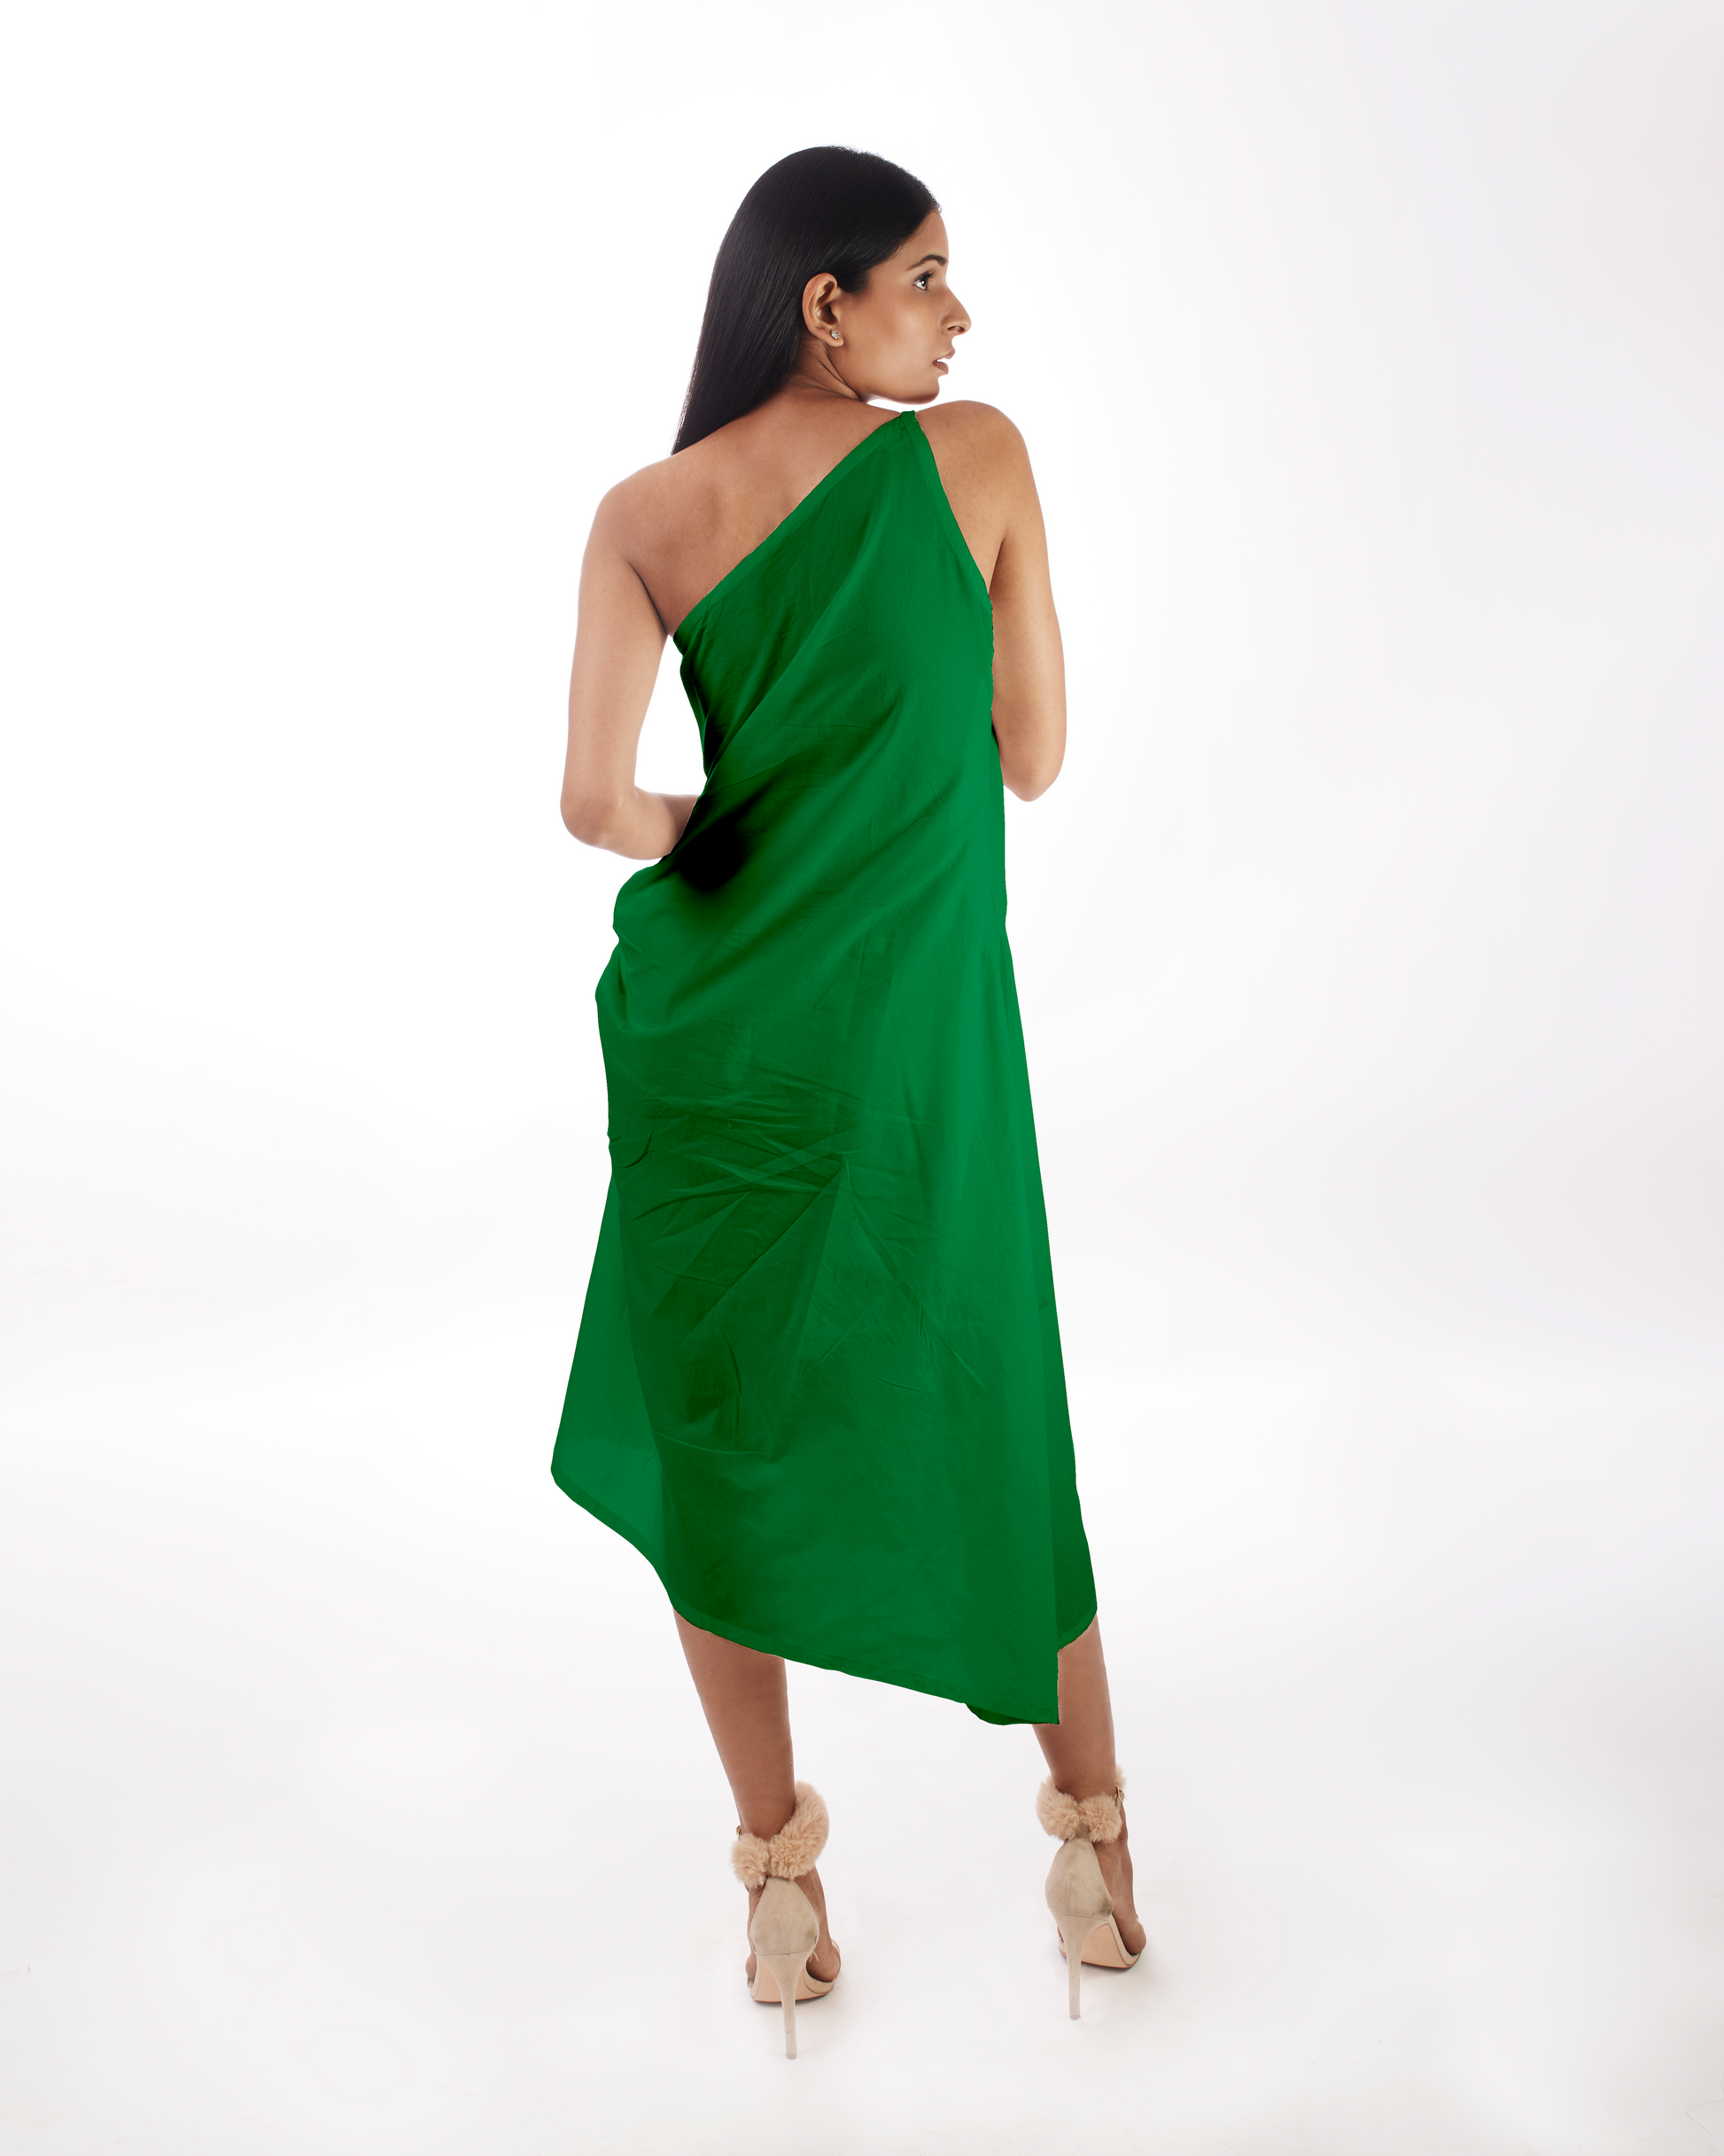 Green One Shoulder Dress by Kamakhyaa with 100% pure cotton, FB ADS JUNE, Fitted At Waist, Green, KKYSS, Naturally Made, One Shoulder Dresses, Party Wear, Regular Fit, Solids, Summer Sutra, Womenswear at Kamakhyaa for sustainable fashion